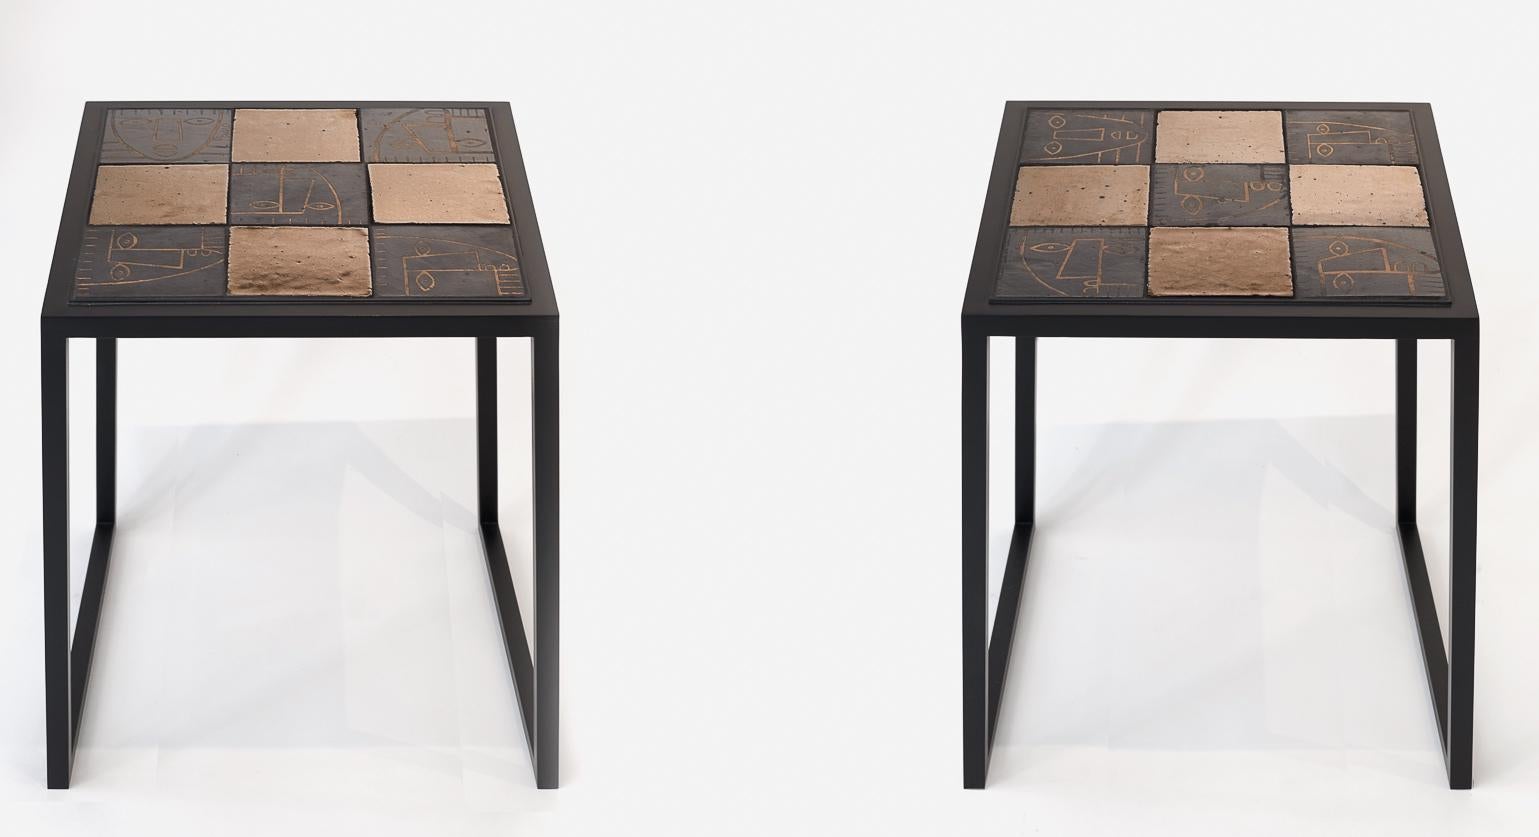 Pair of Side Tables Black Metal Frame and Ceramic Tops by Dalo 1